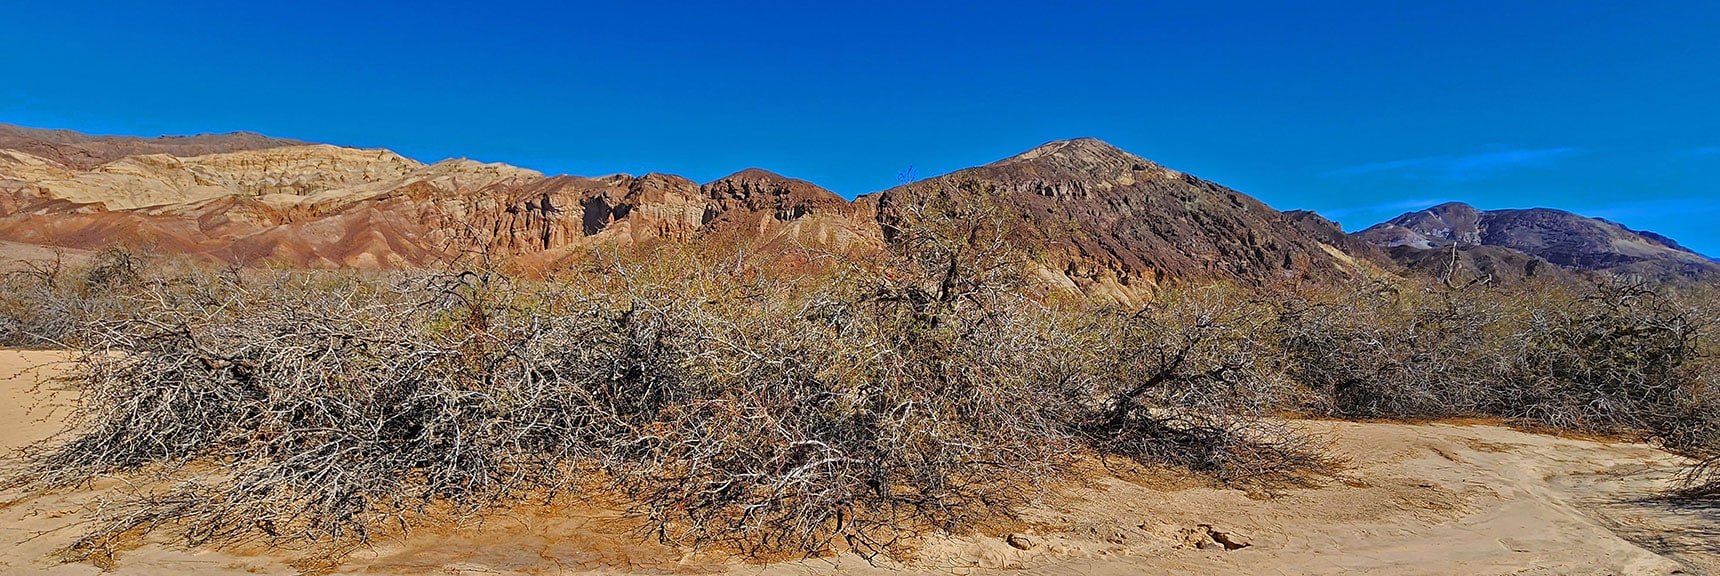 Mesquite Seeds Were a Food Staple of Native Americans in the Area | Mesquite Grove | Death Valley, California | David Smith | Las Vegas Area Trails